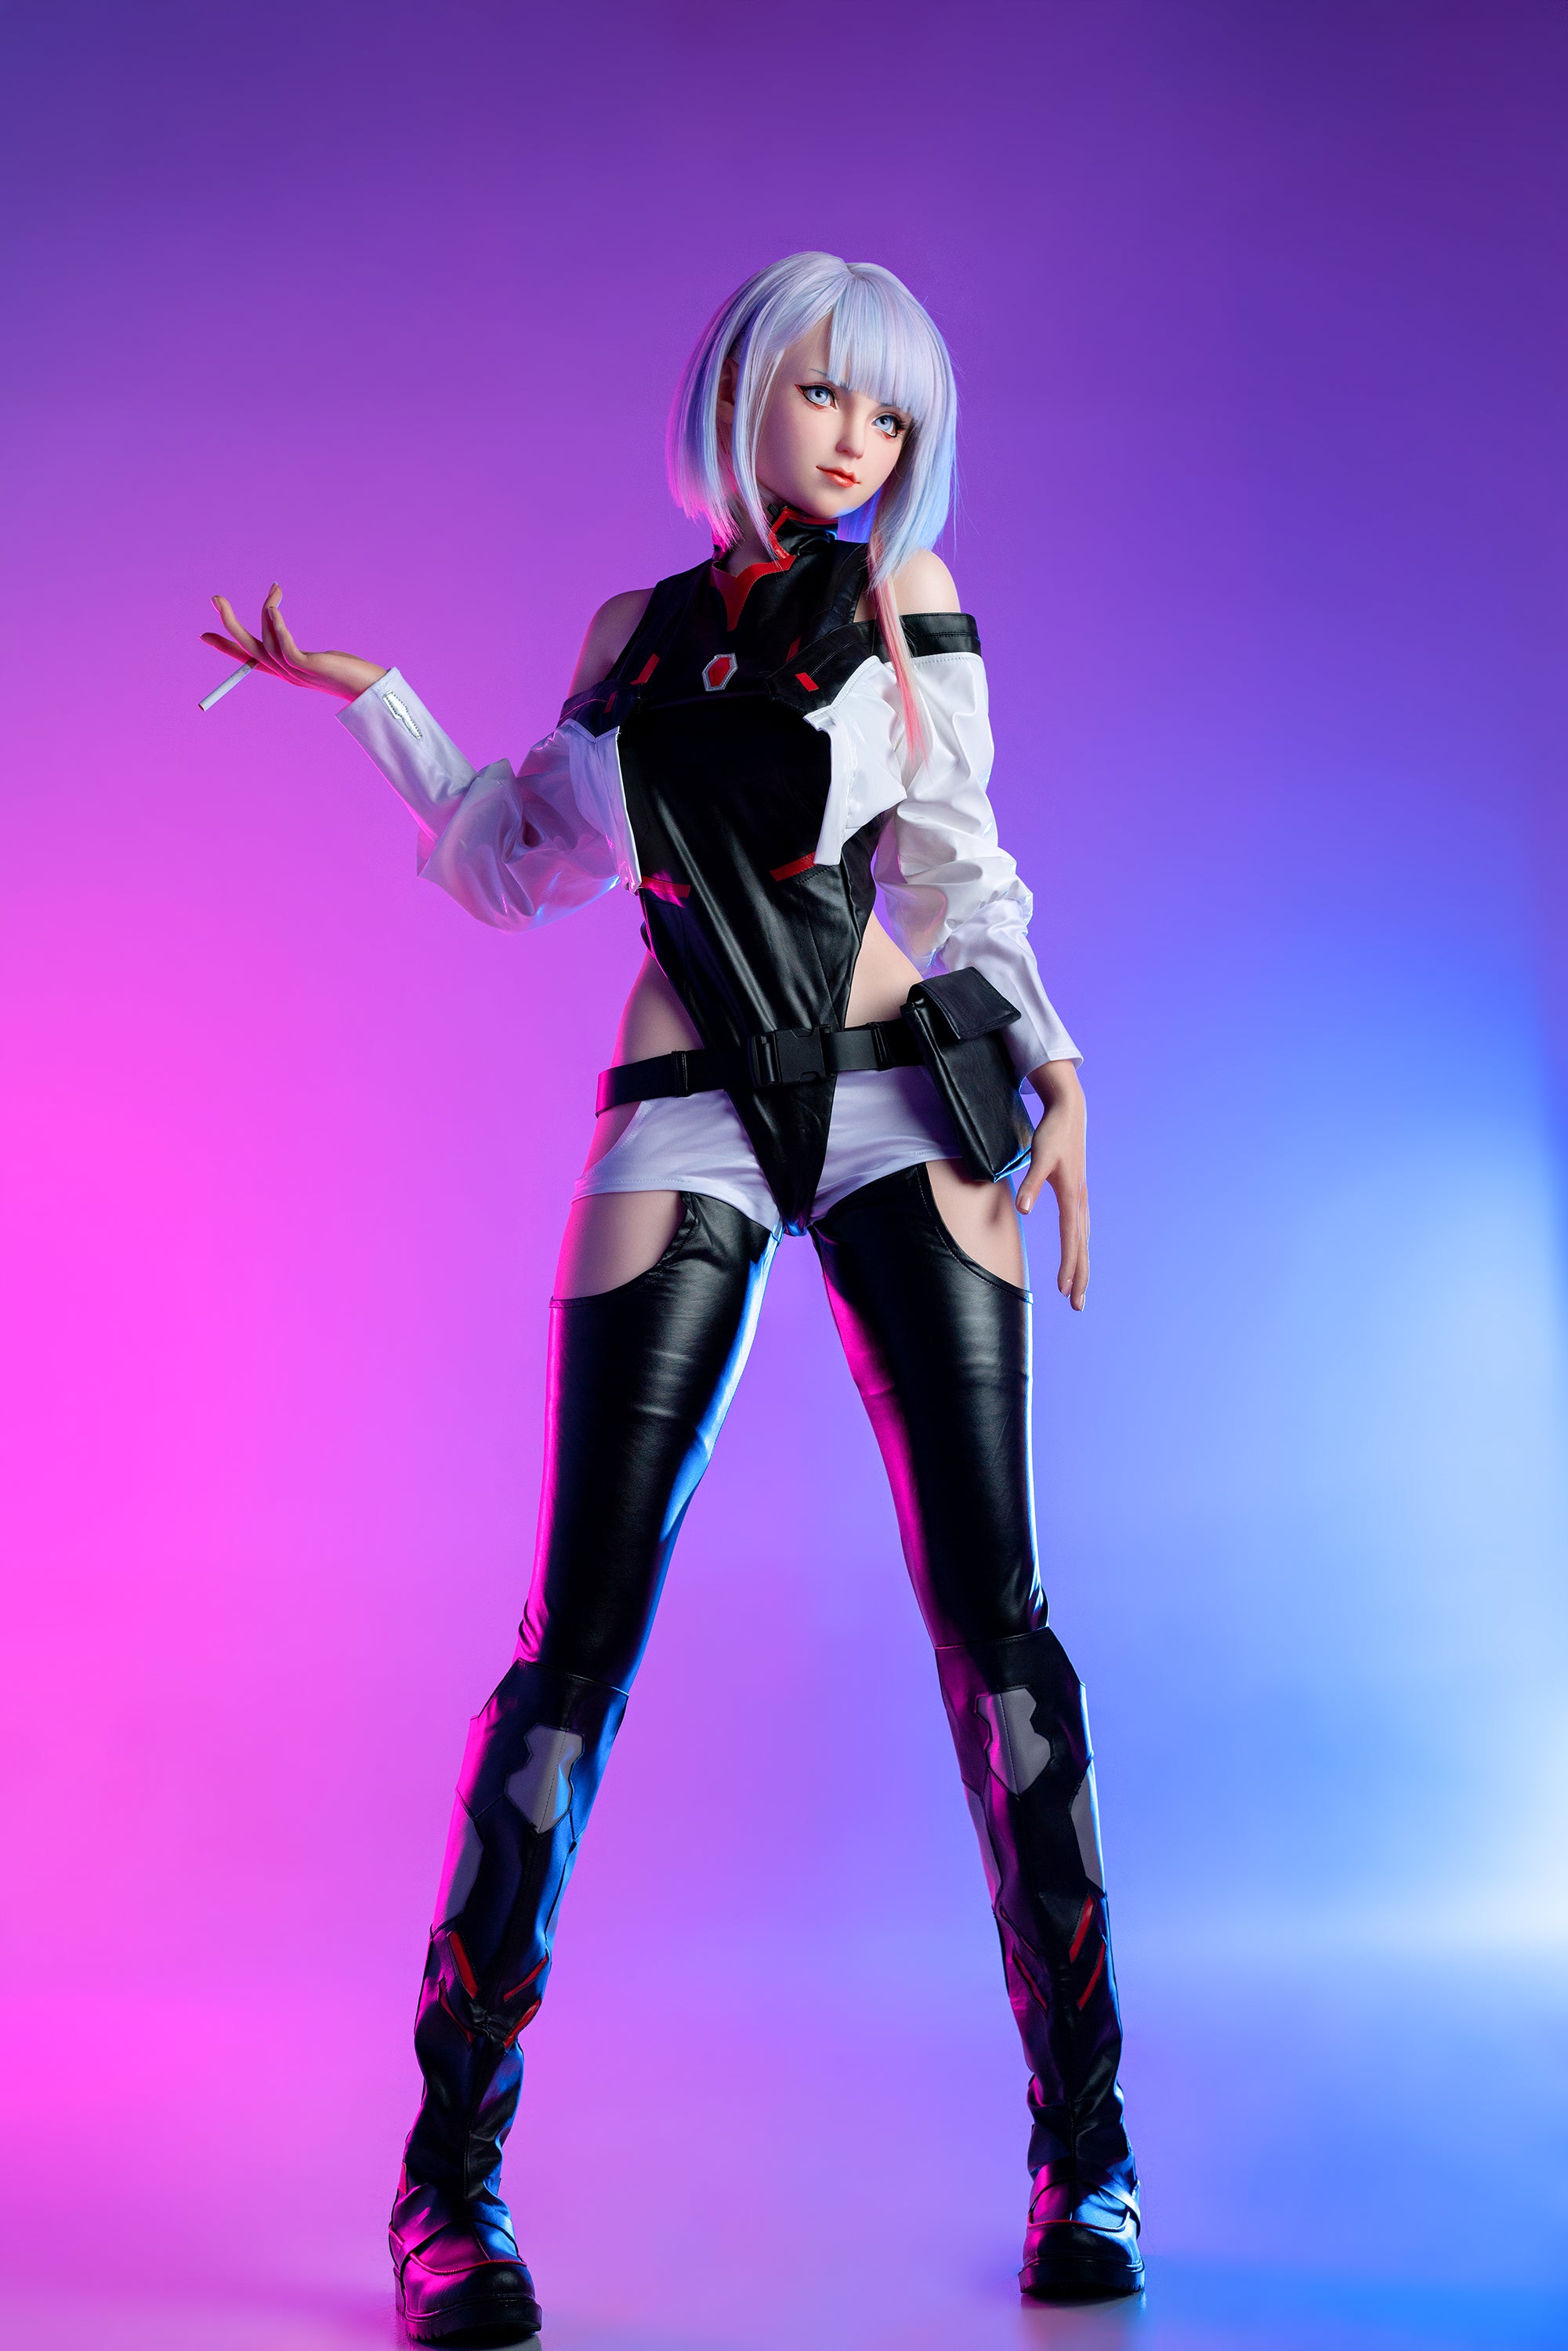 Game Lady 156 cm Silicone - Lucyna Kushinada | Buy Sex Dolls at DOLLS ACTUALLY